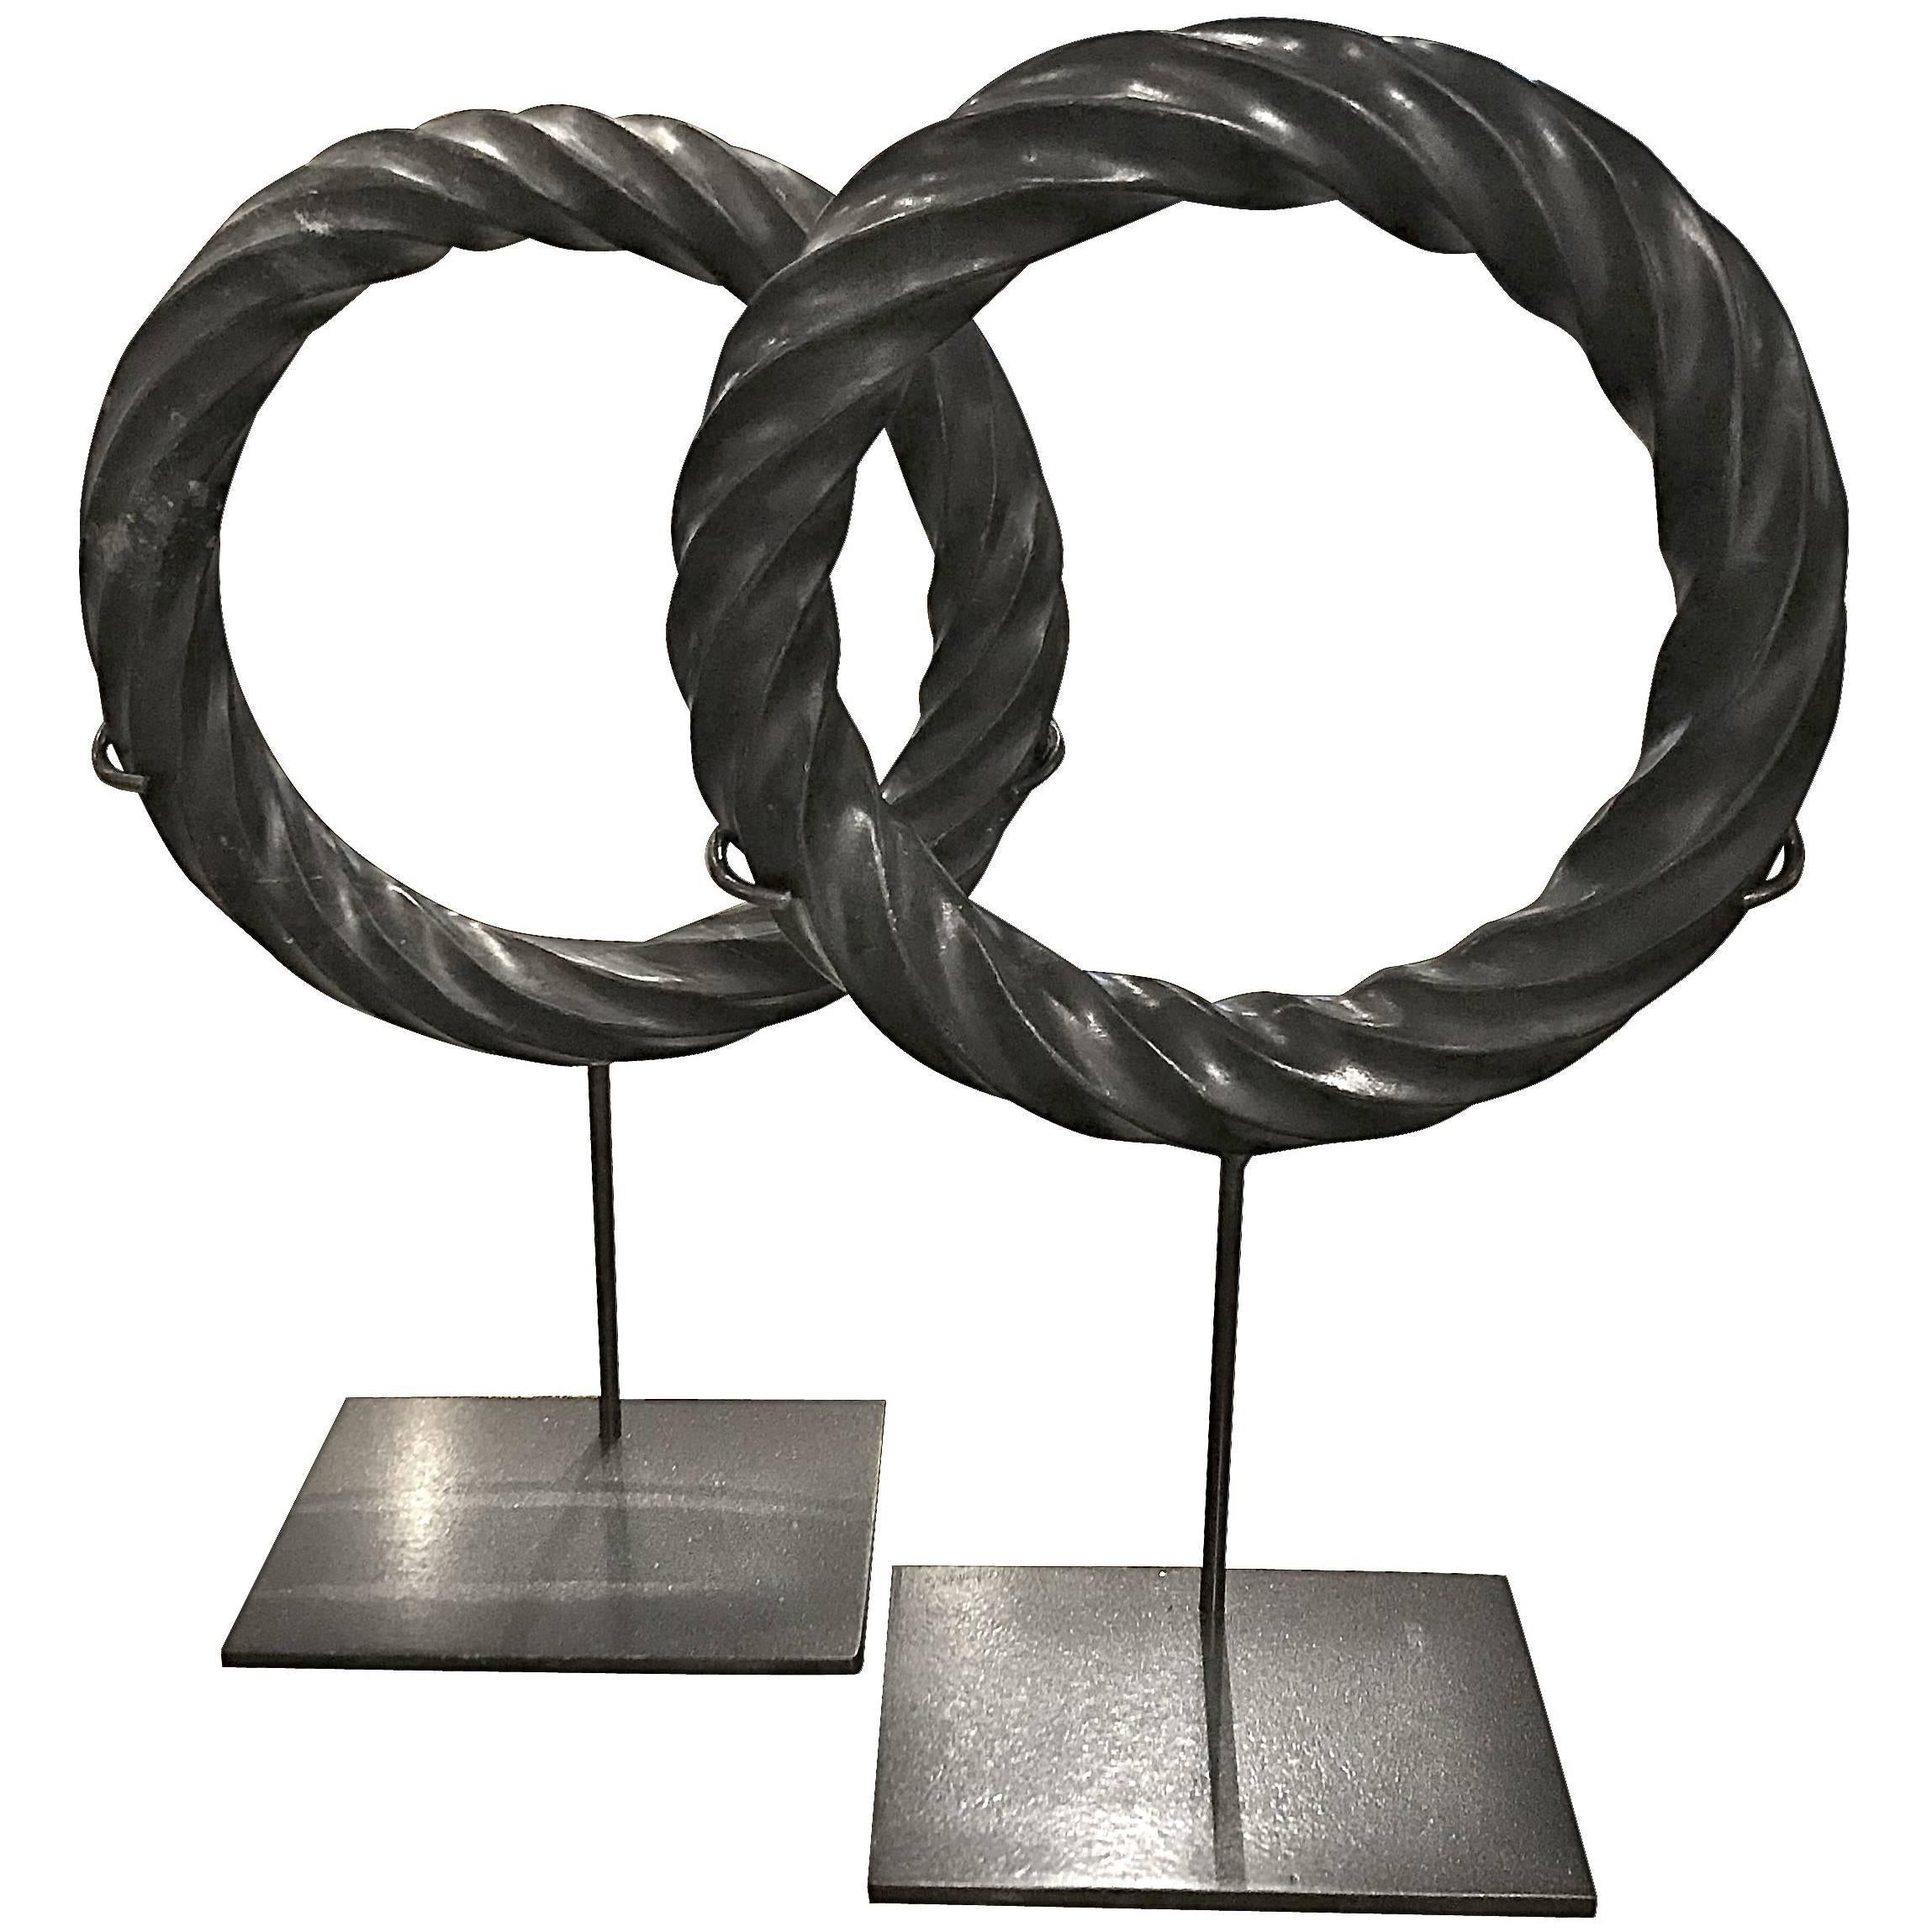 Pair of Black Twisted Marble Ring Sculptures on Stands, China, Contemporary